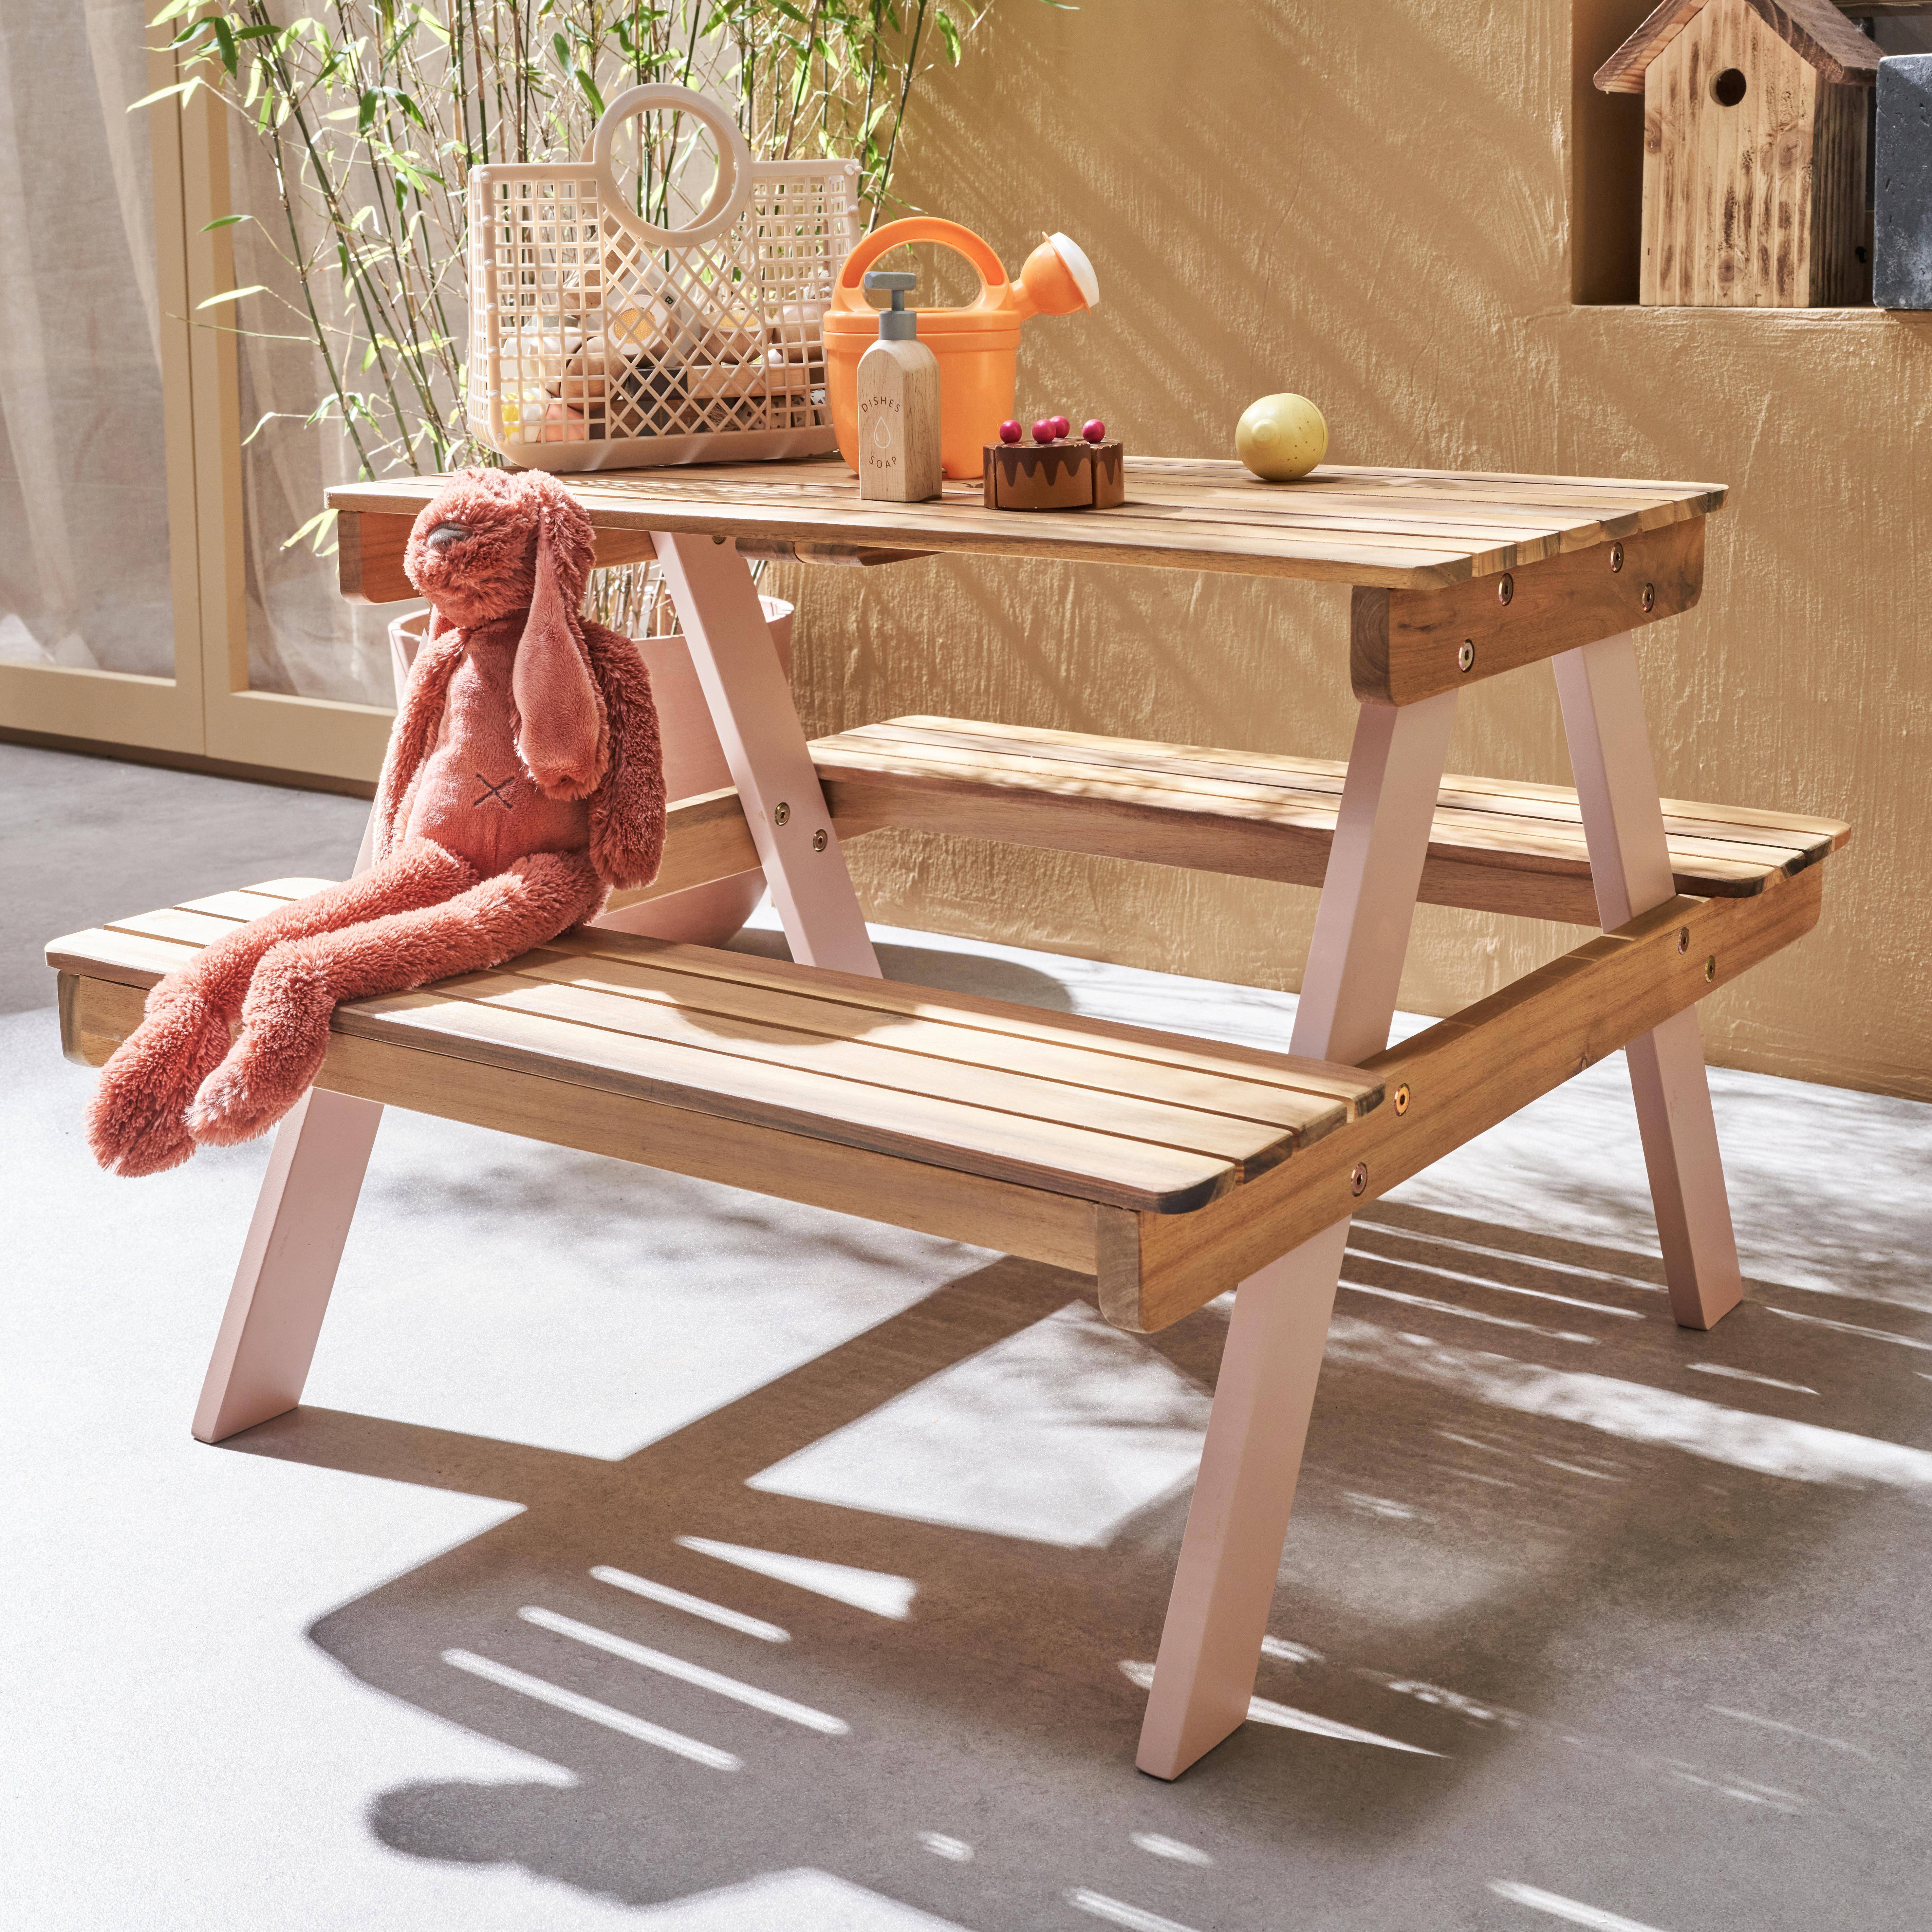 Acacia wood picnic table for children, 2 places, light teak and pink colour,sweeek,Photo2